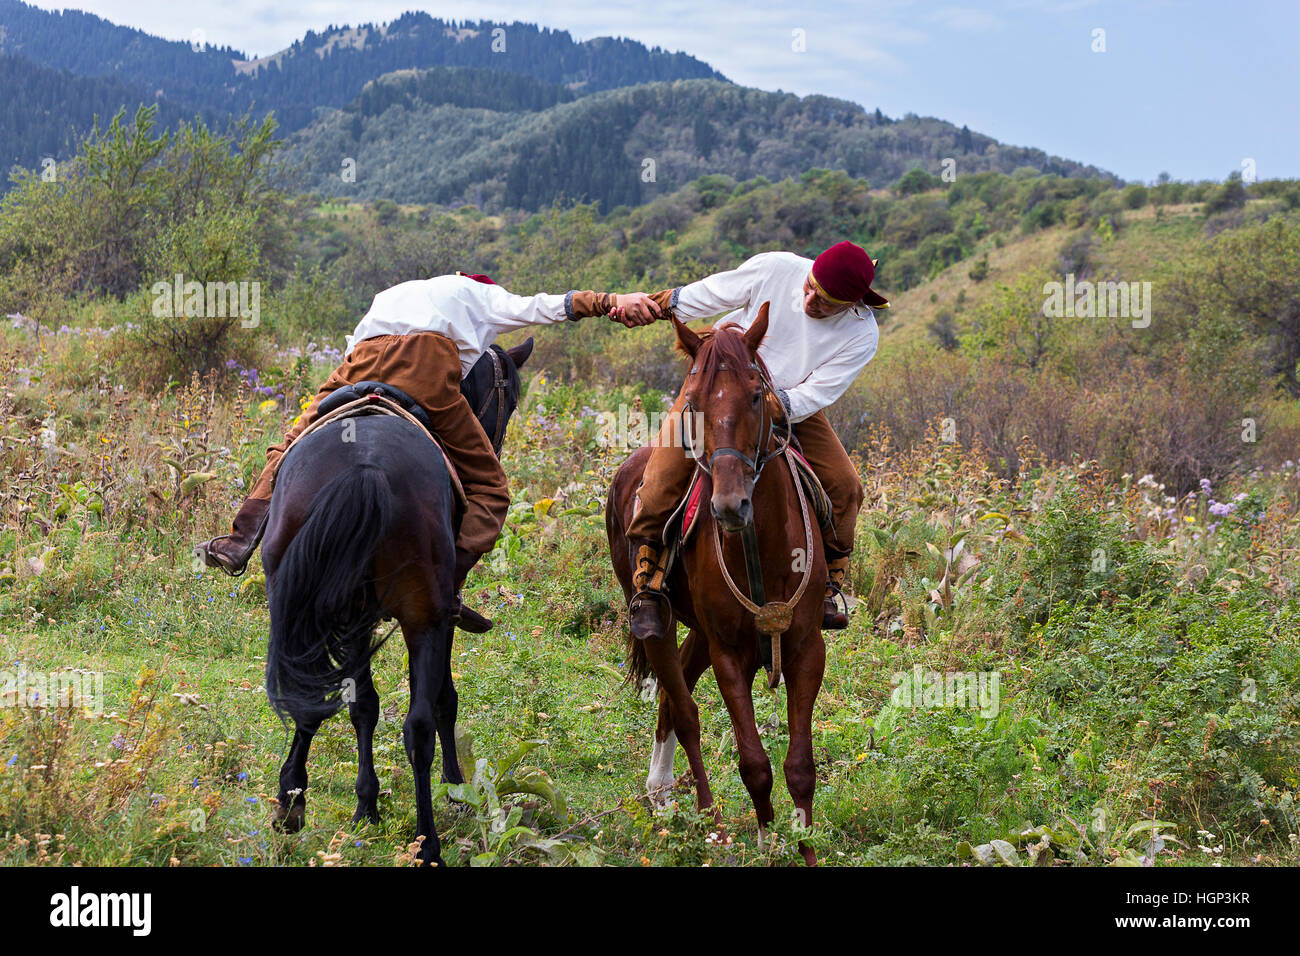 Kazakh men in national costumes performing traditional arm wrestling on horse known as Atpen Audaraspak, in Almaty, Kazakhstan Stock Photo